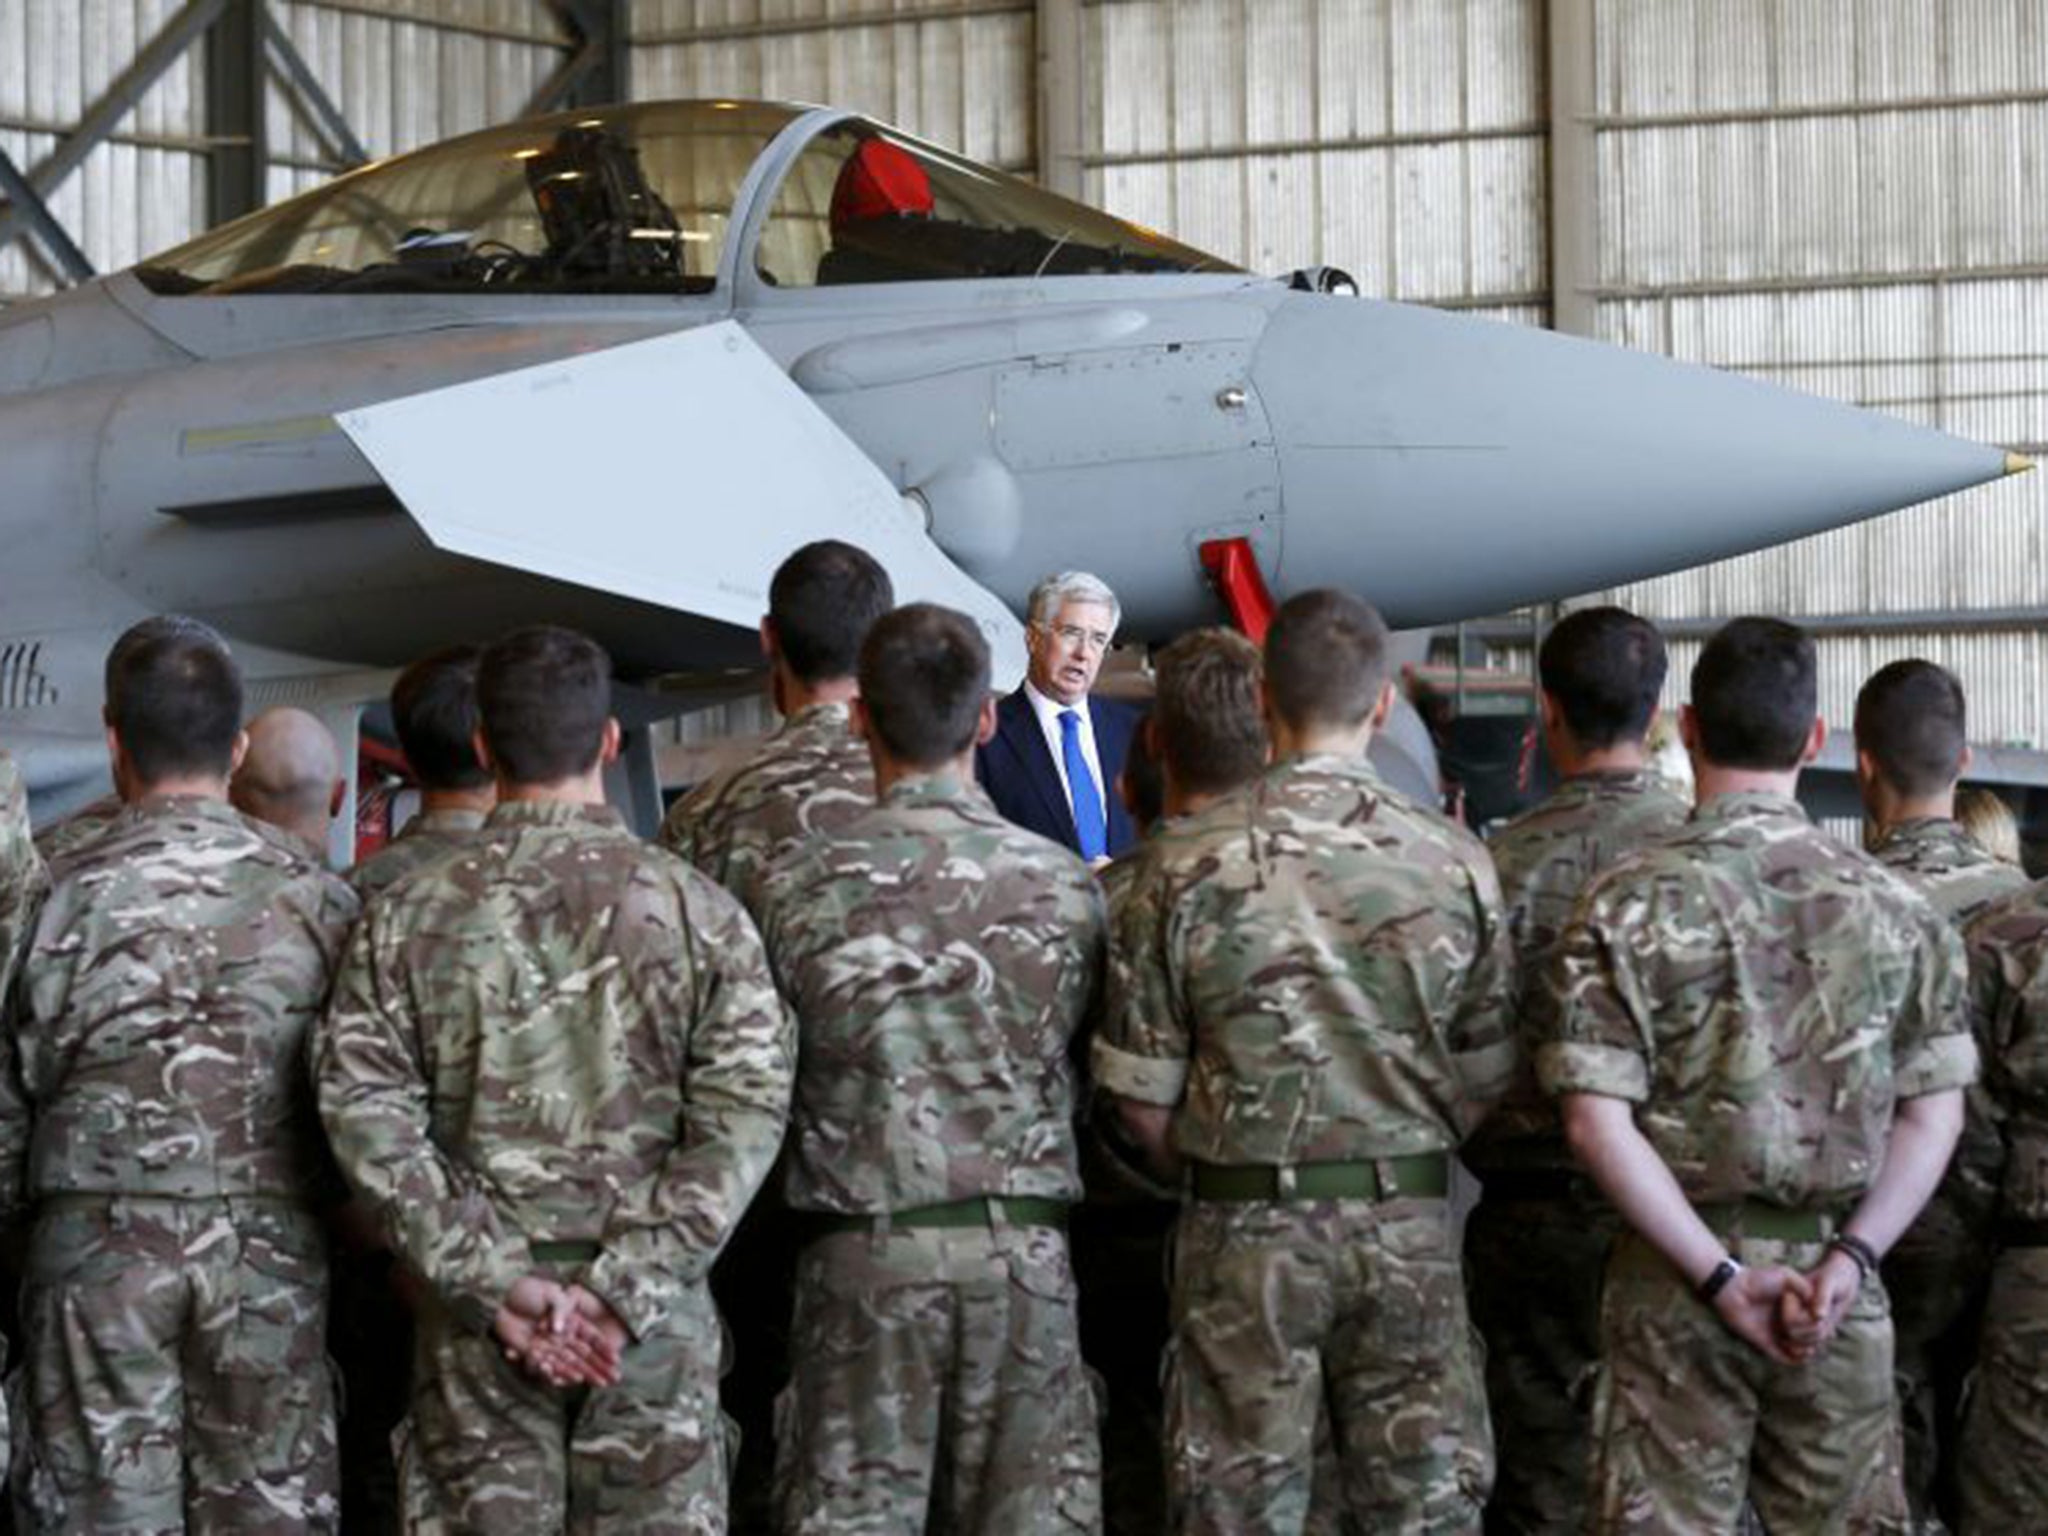 Michael Fallon, the Defence Secretary, speaks to RAF personnel in Cyprus